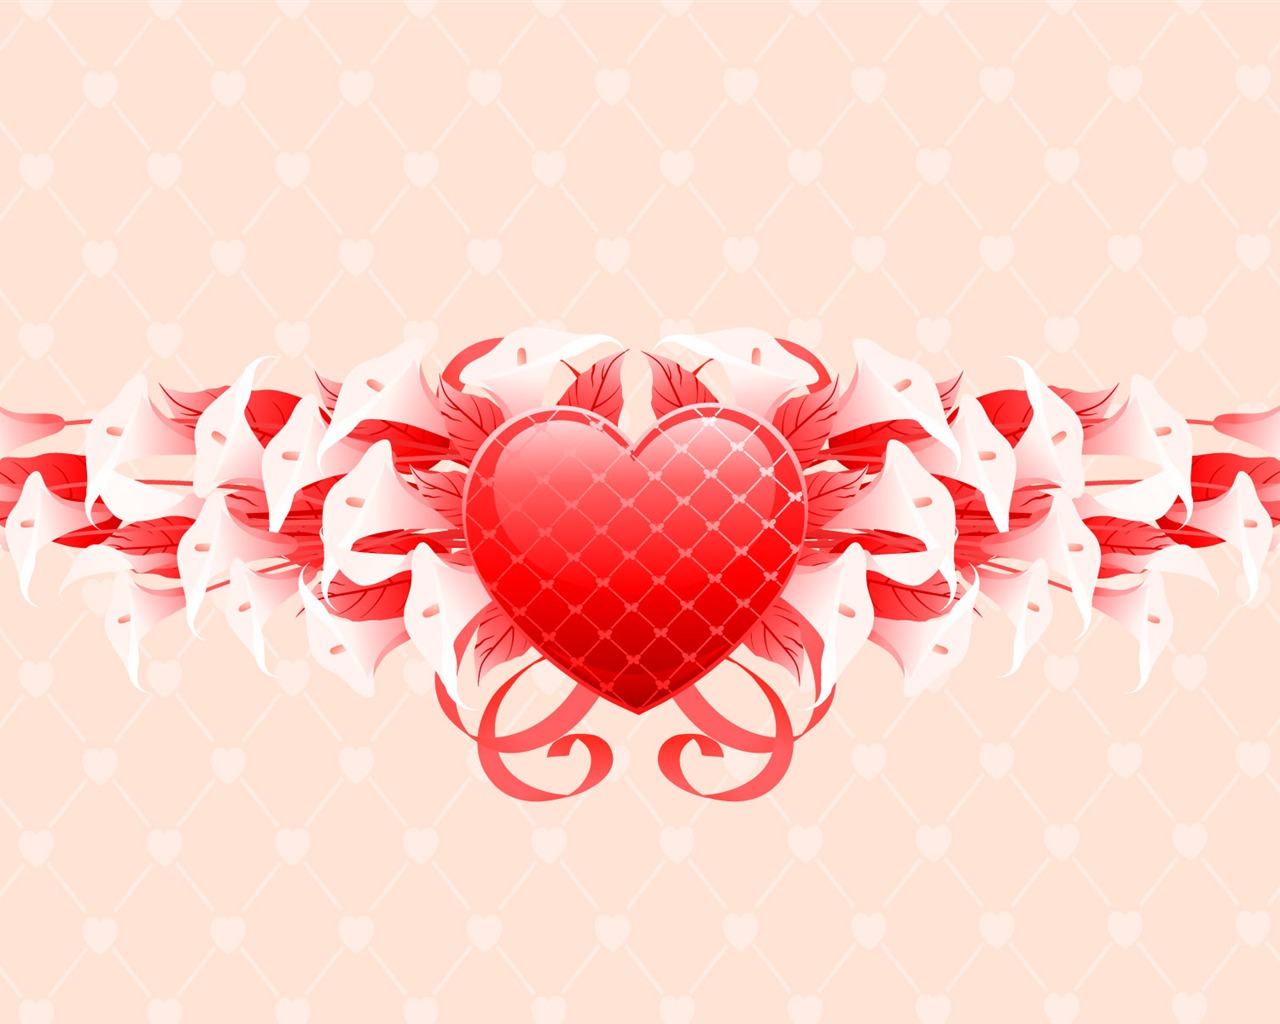 Valentine's Day Theme Wallpapers (6) #16 - 1280x1024